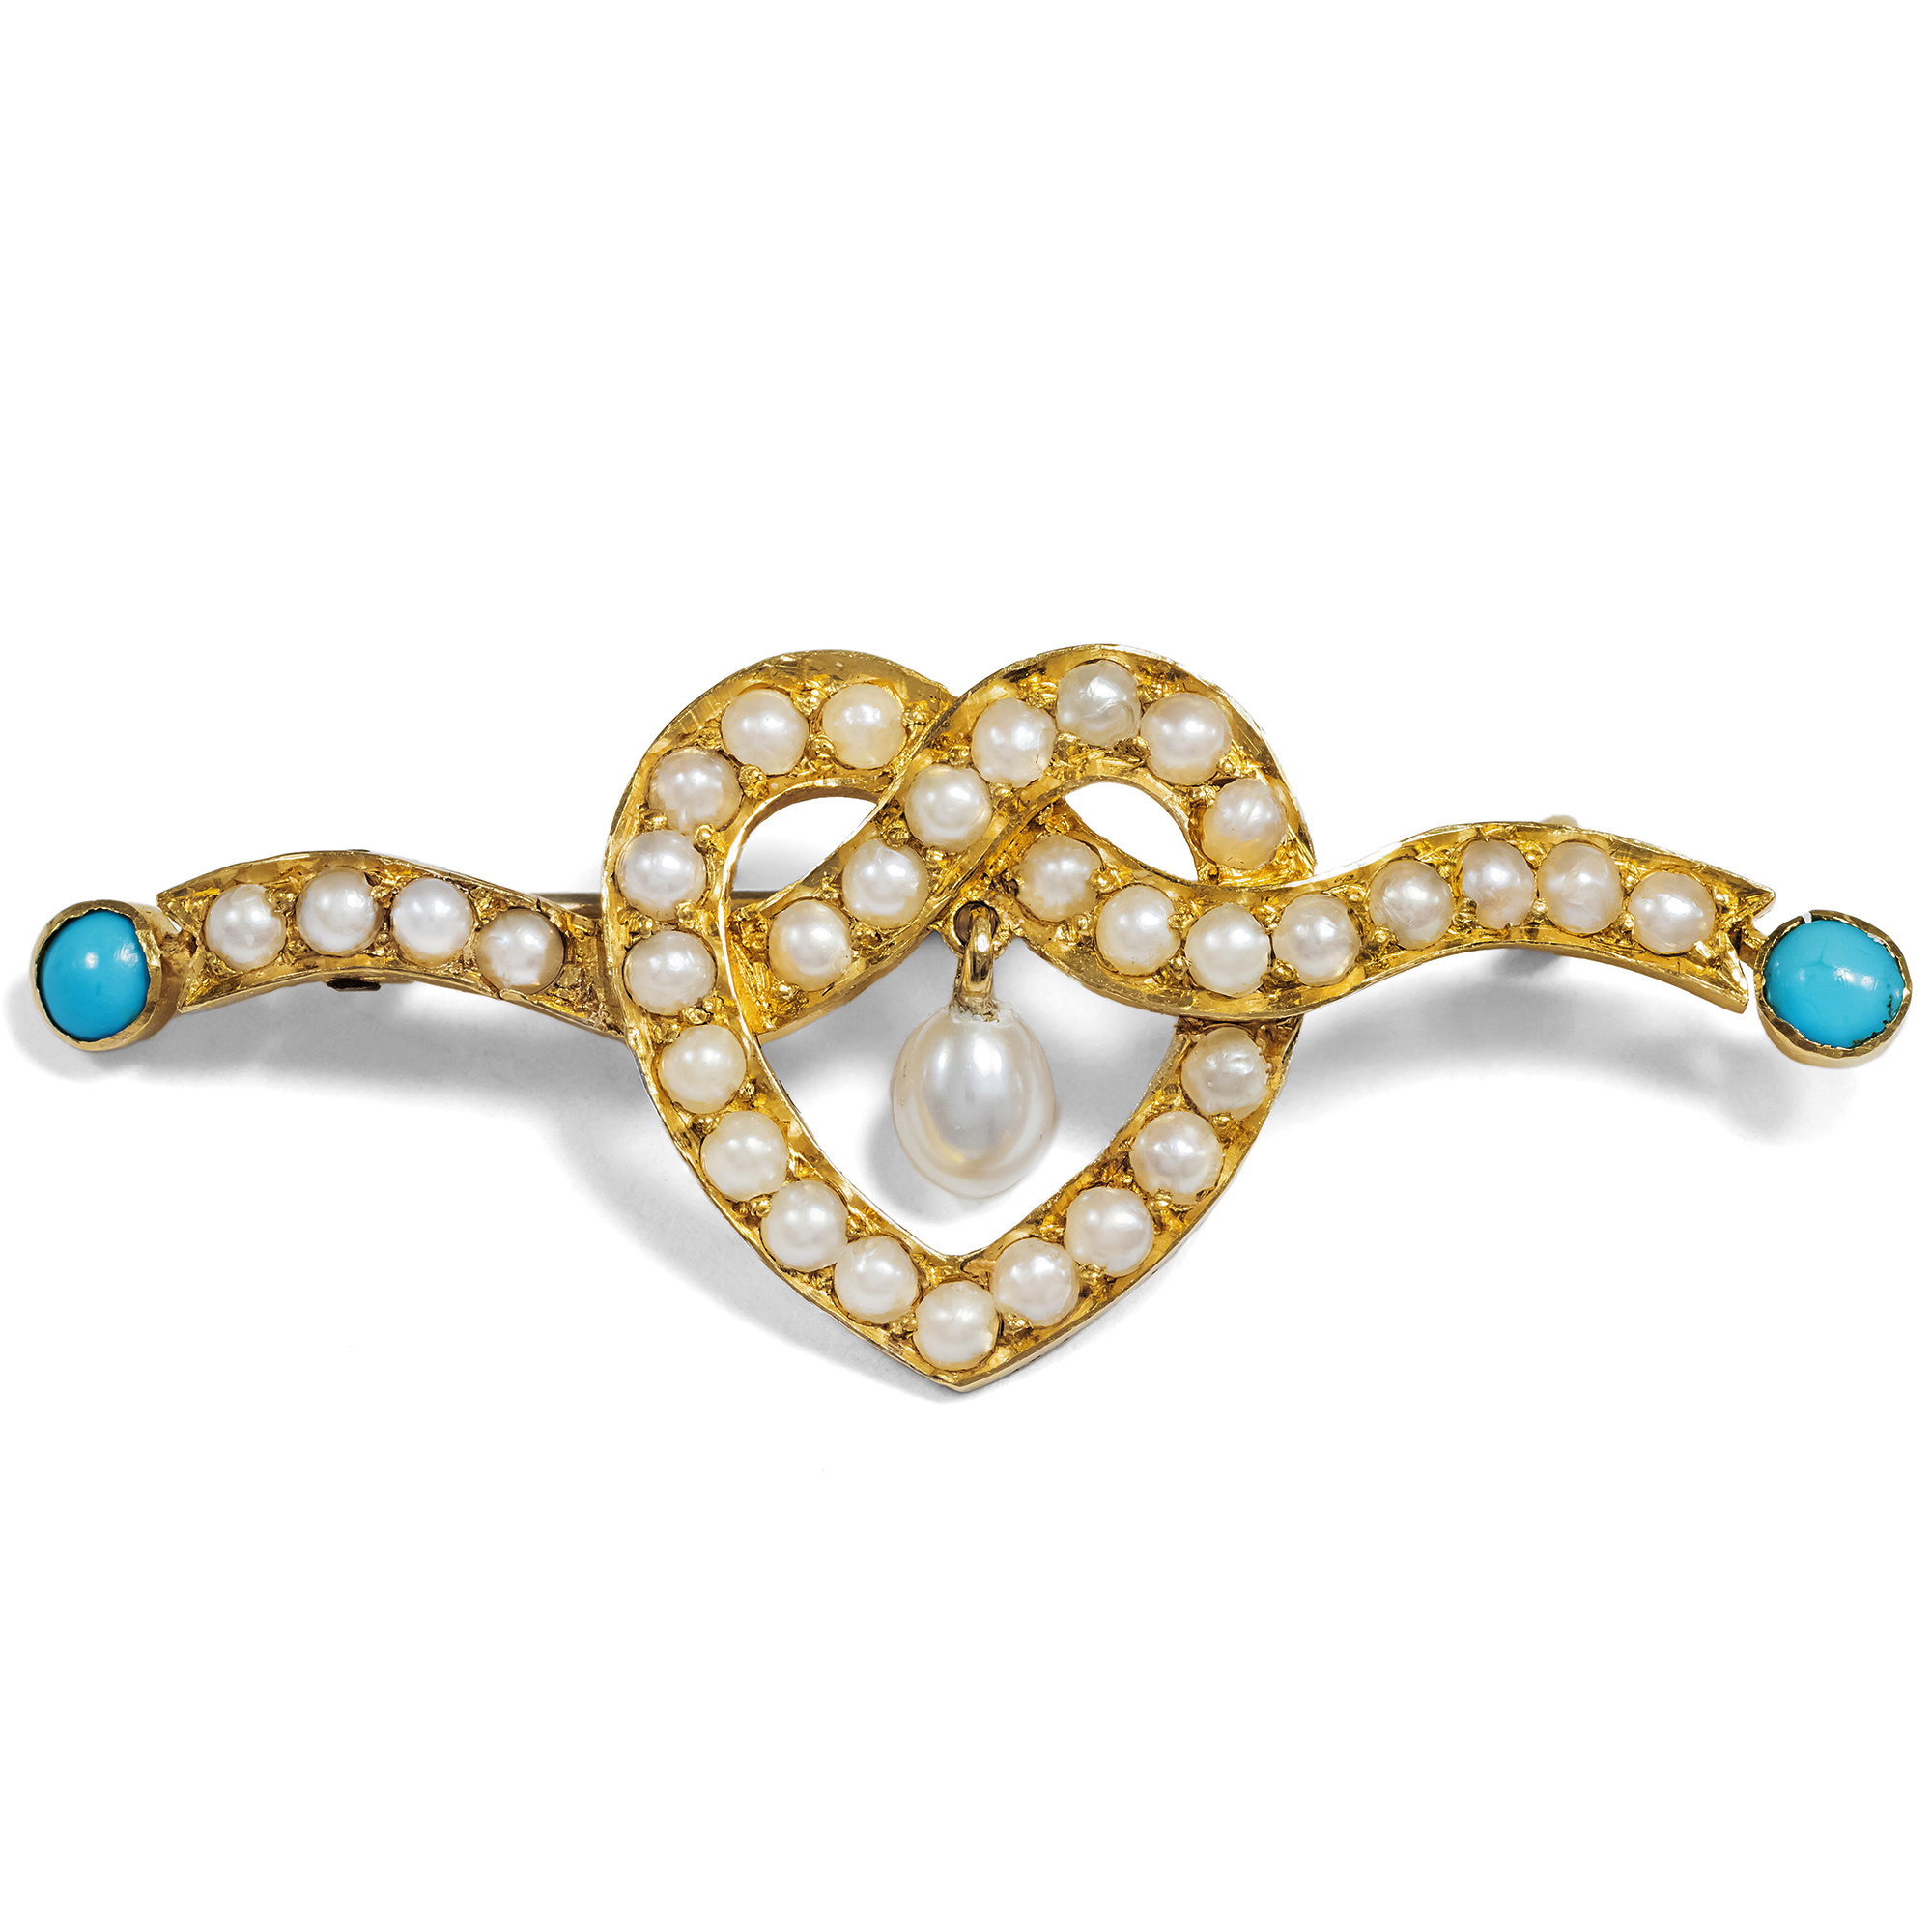 Victorian Brooch With Pearls & Turquoise in Gold, Circa 1890